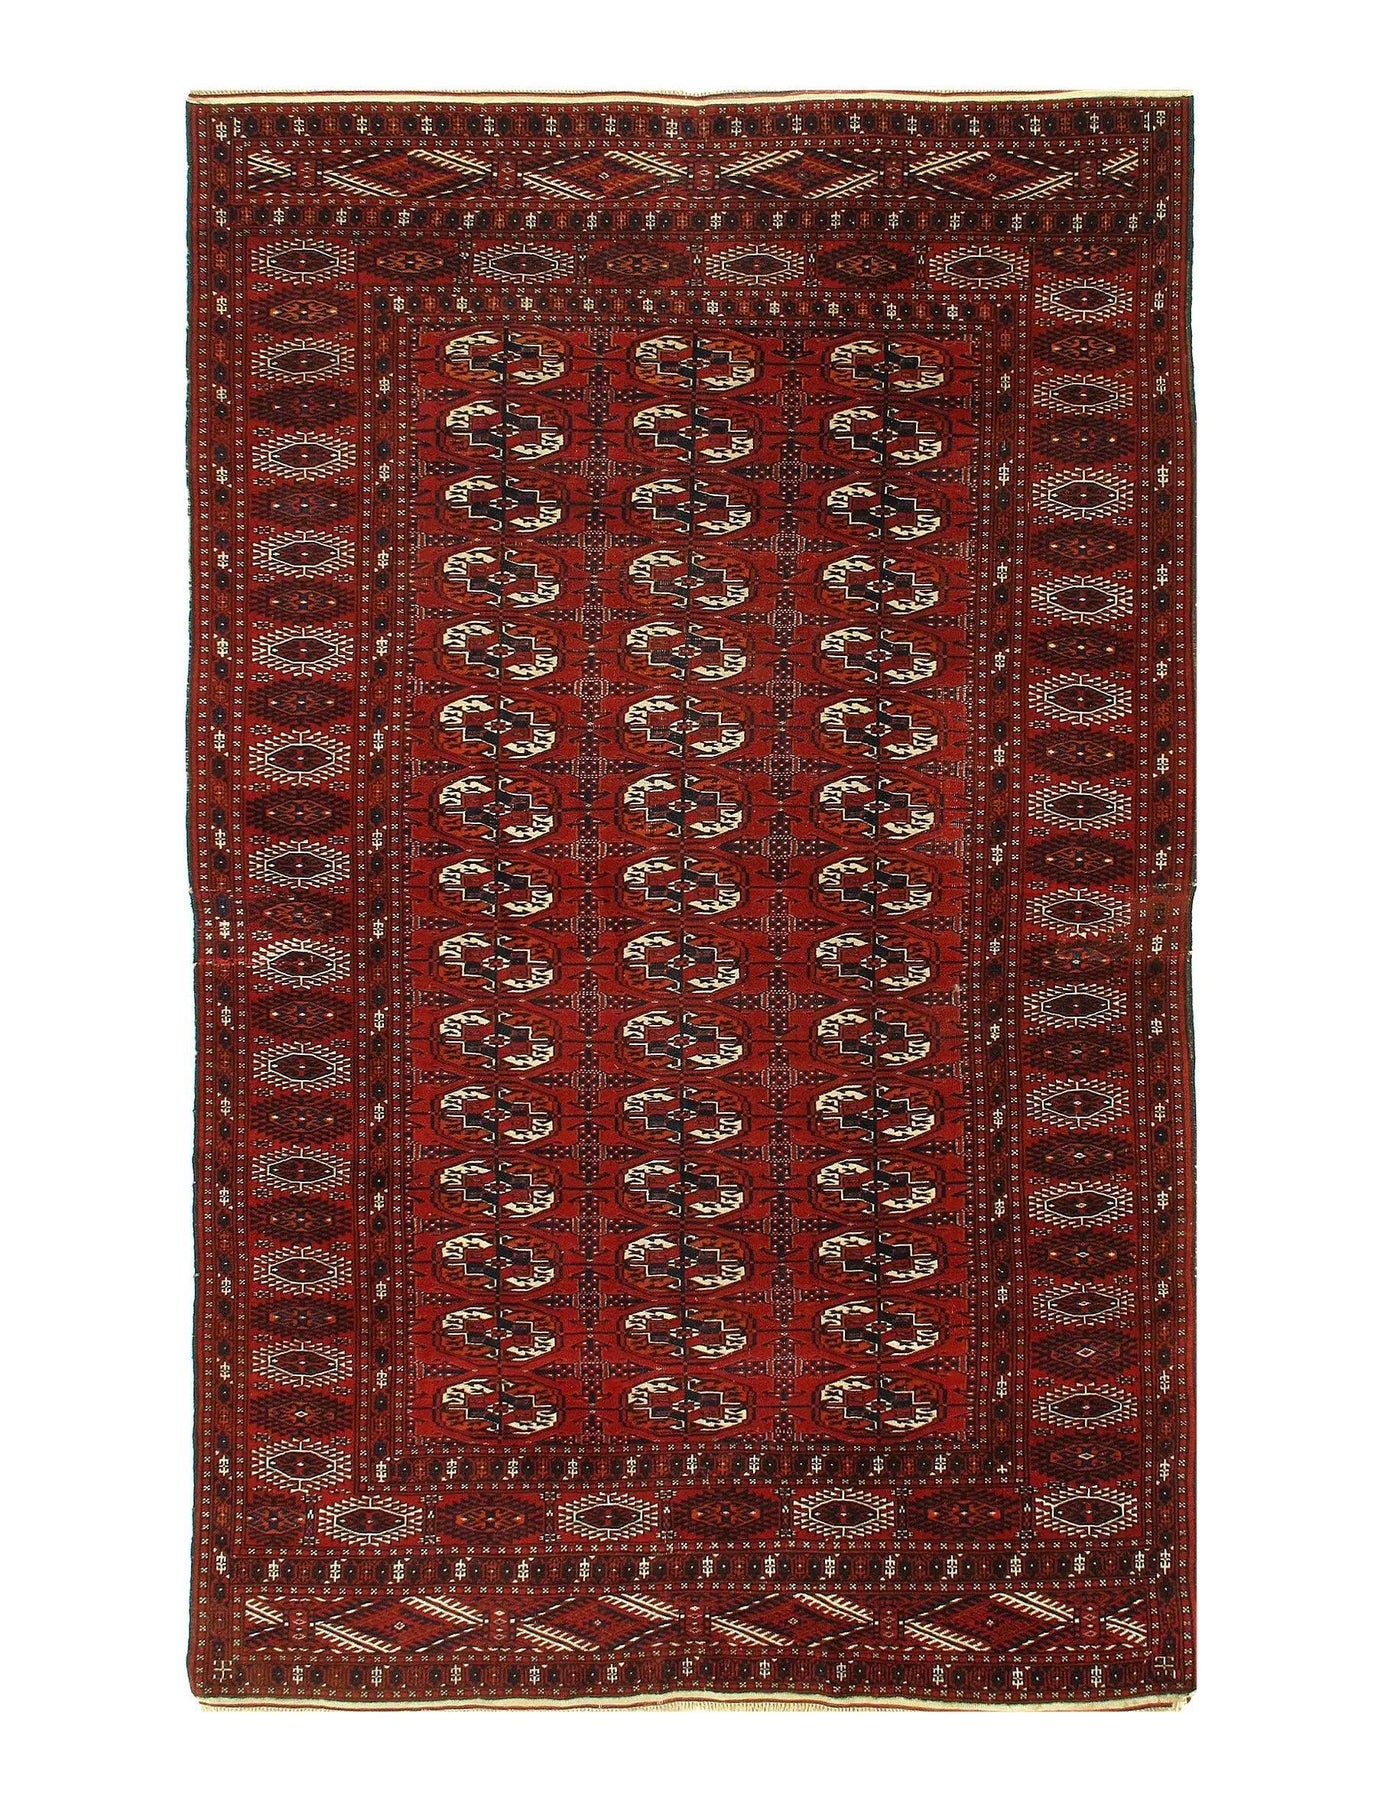 Red Russian Antique Turkman Rug - 5'6'' X 8'11''